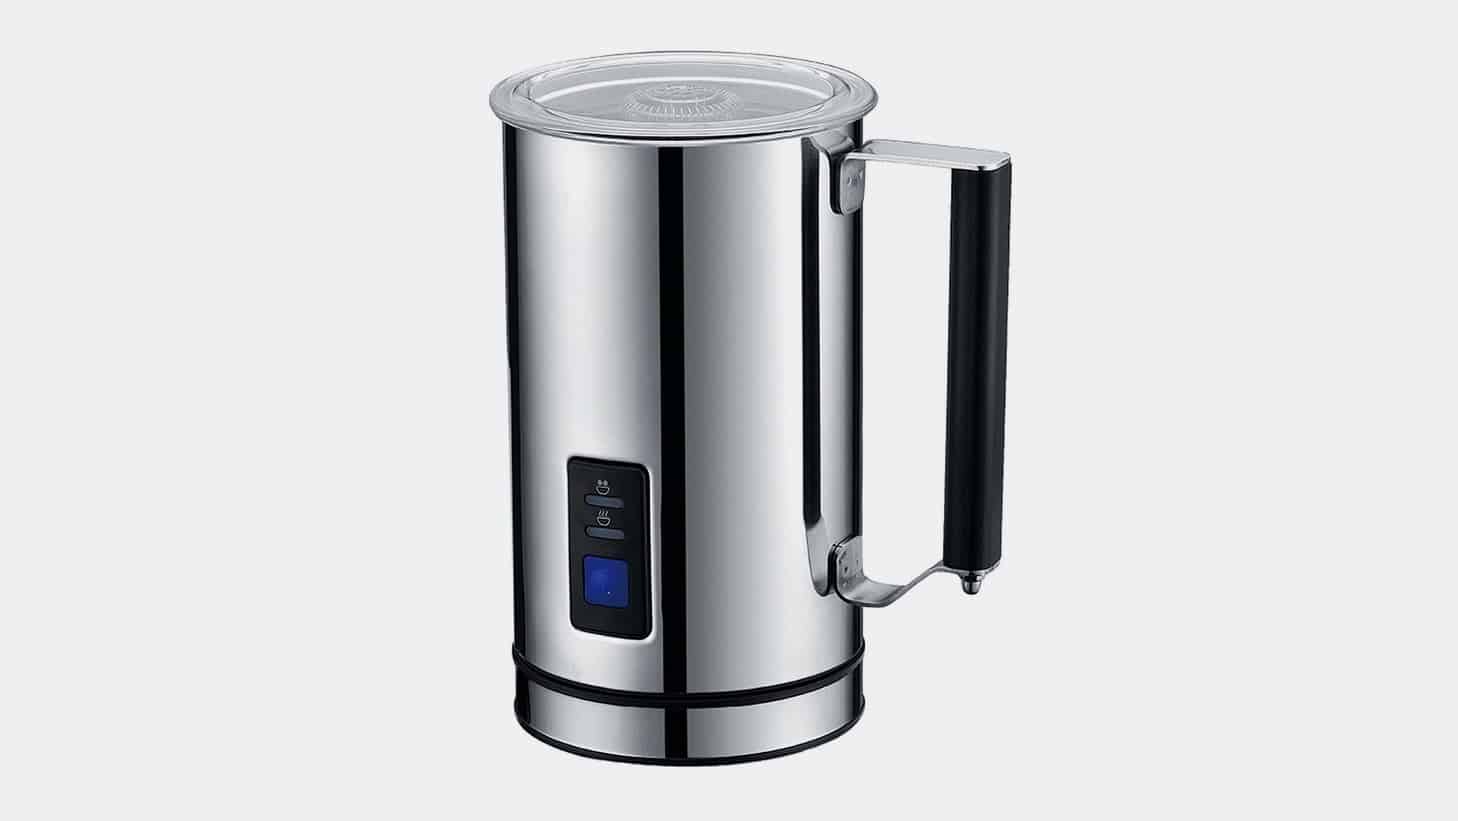 Kuissential Deluxe Automatic Milk Frother